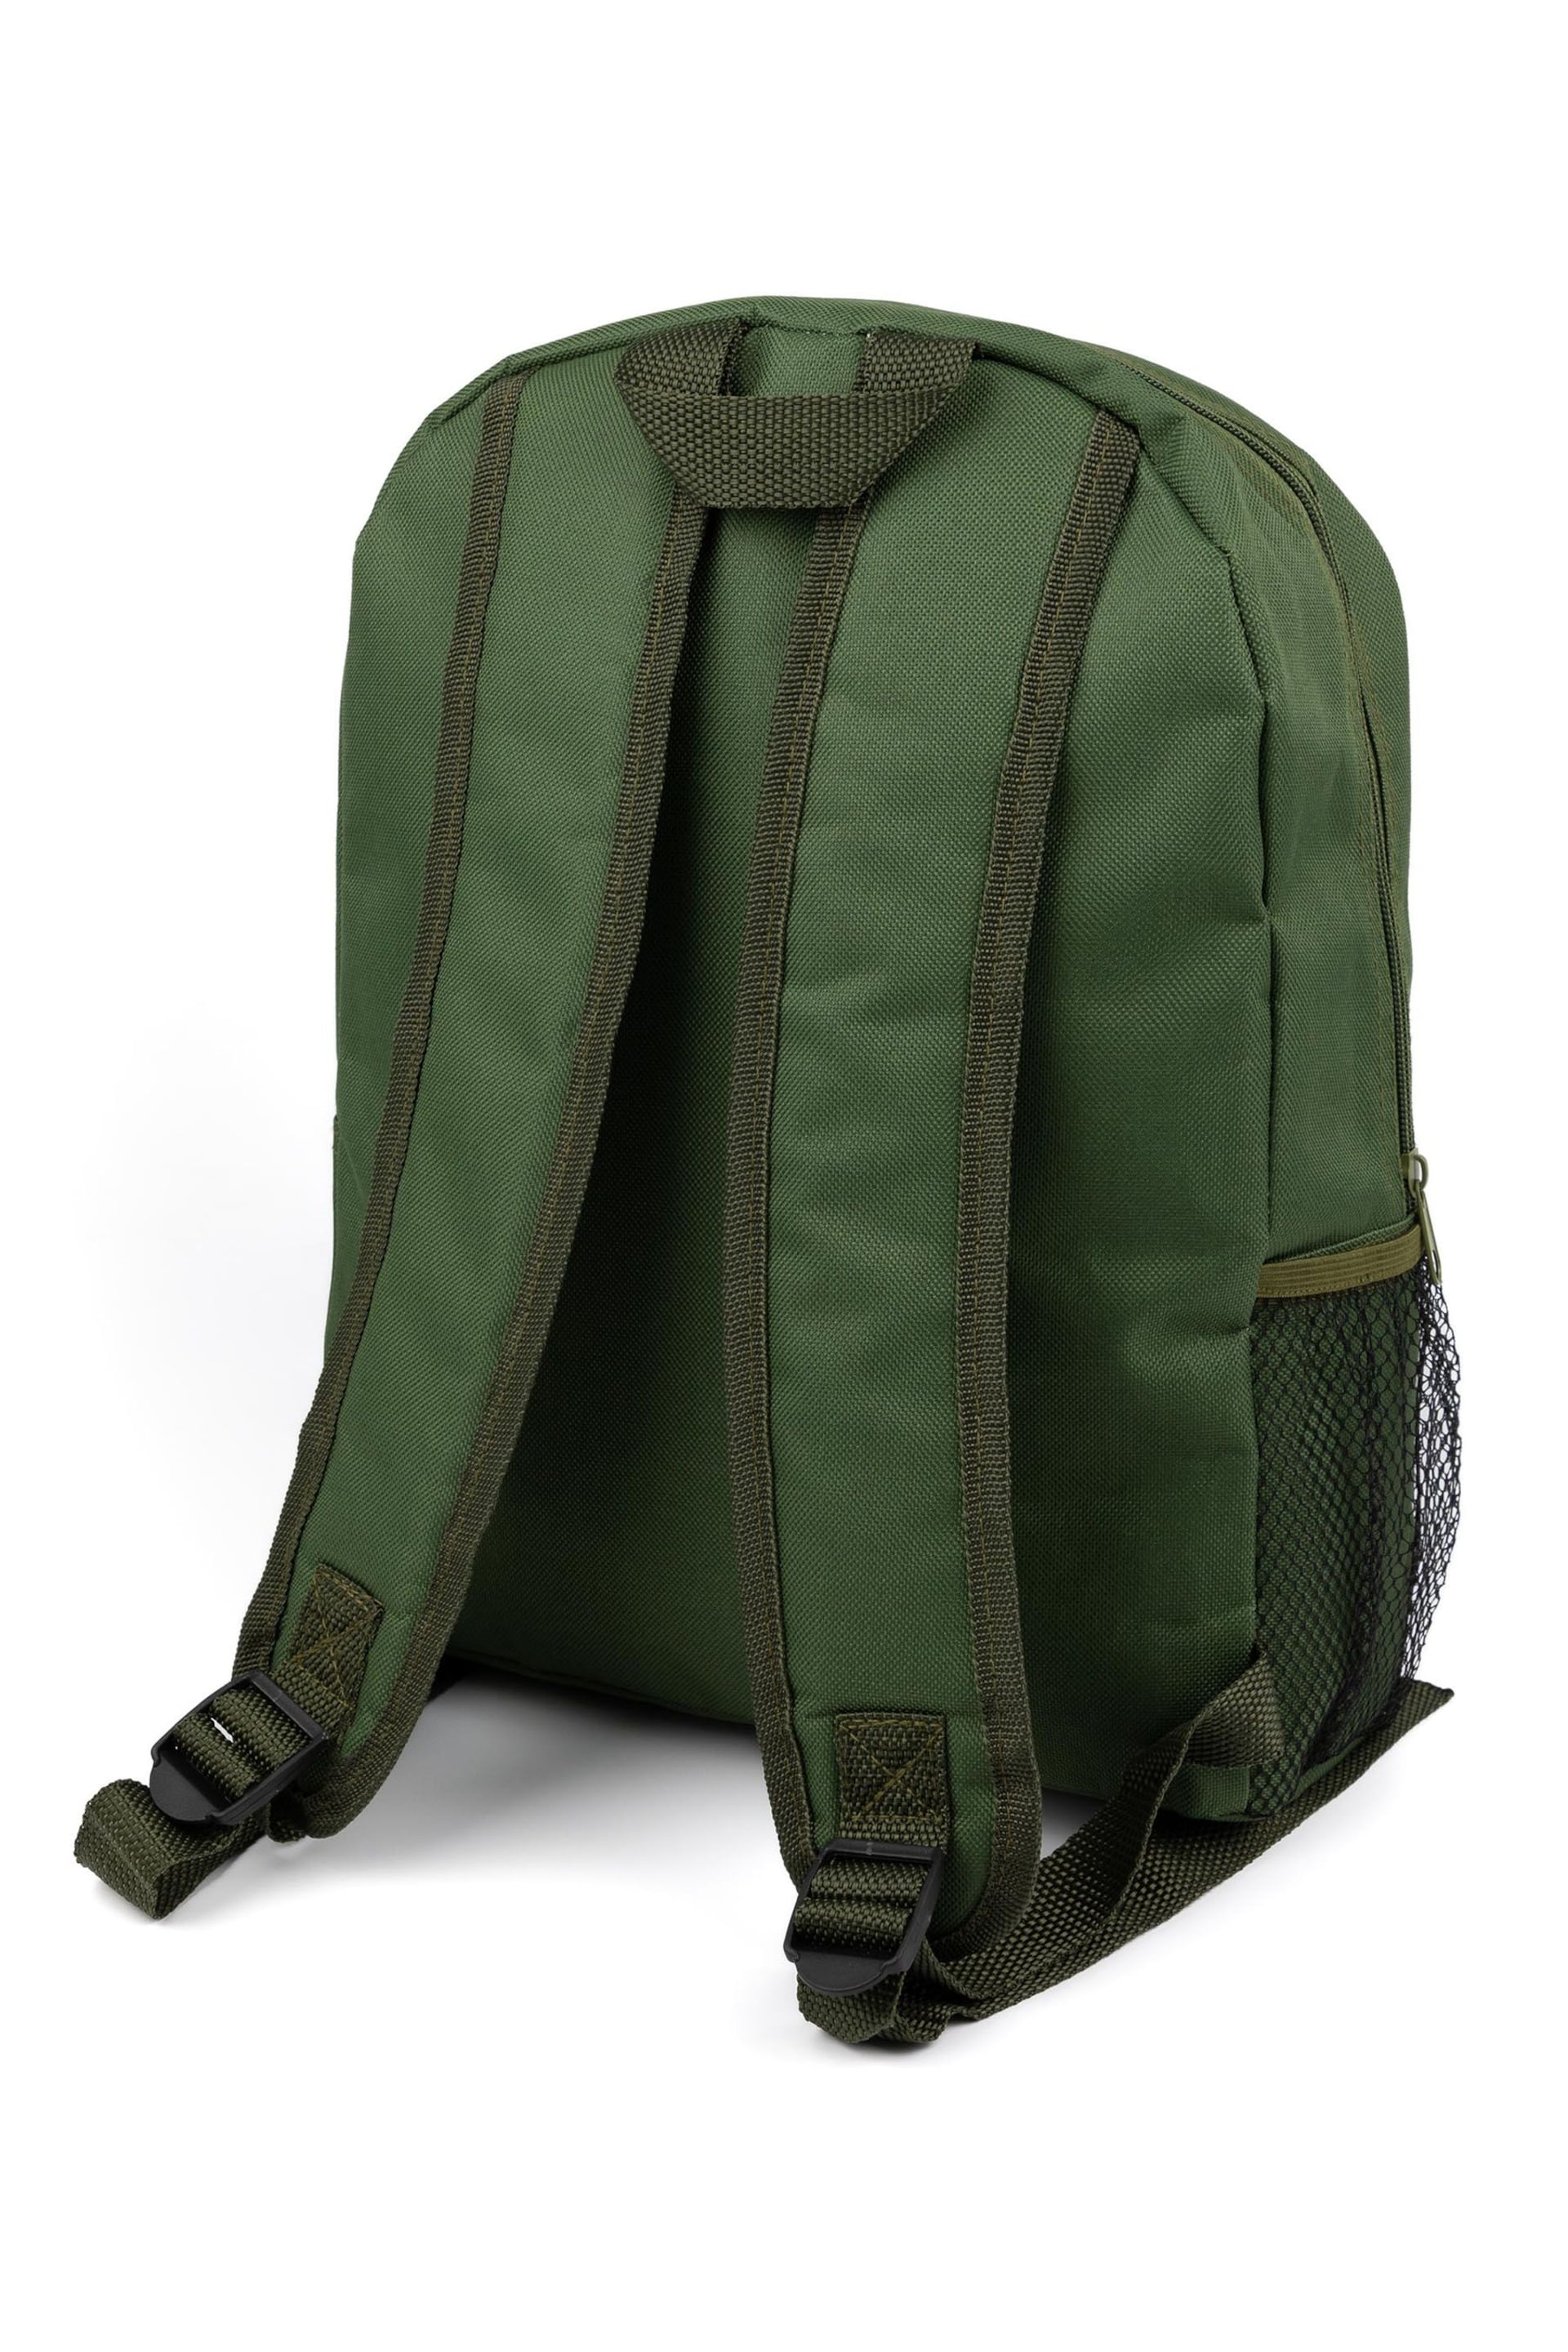 Vanilla Underground Green Marvel Unisex Kids Groot Guardian Of The Galaxy Backpack - Image 2 of 6